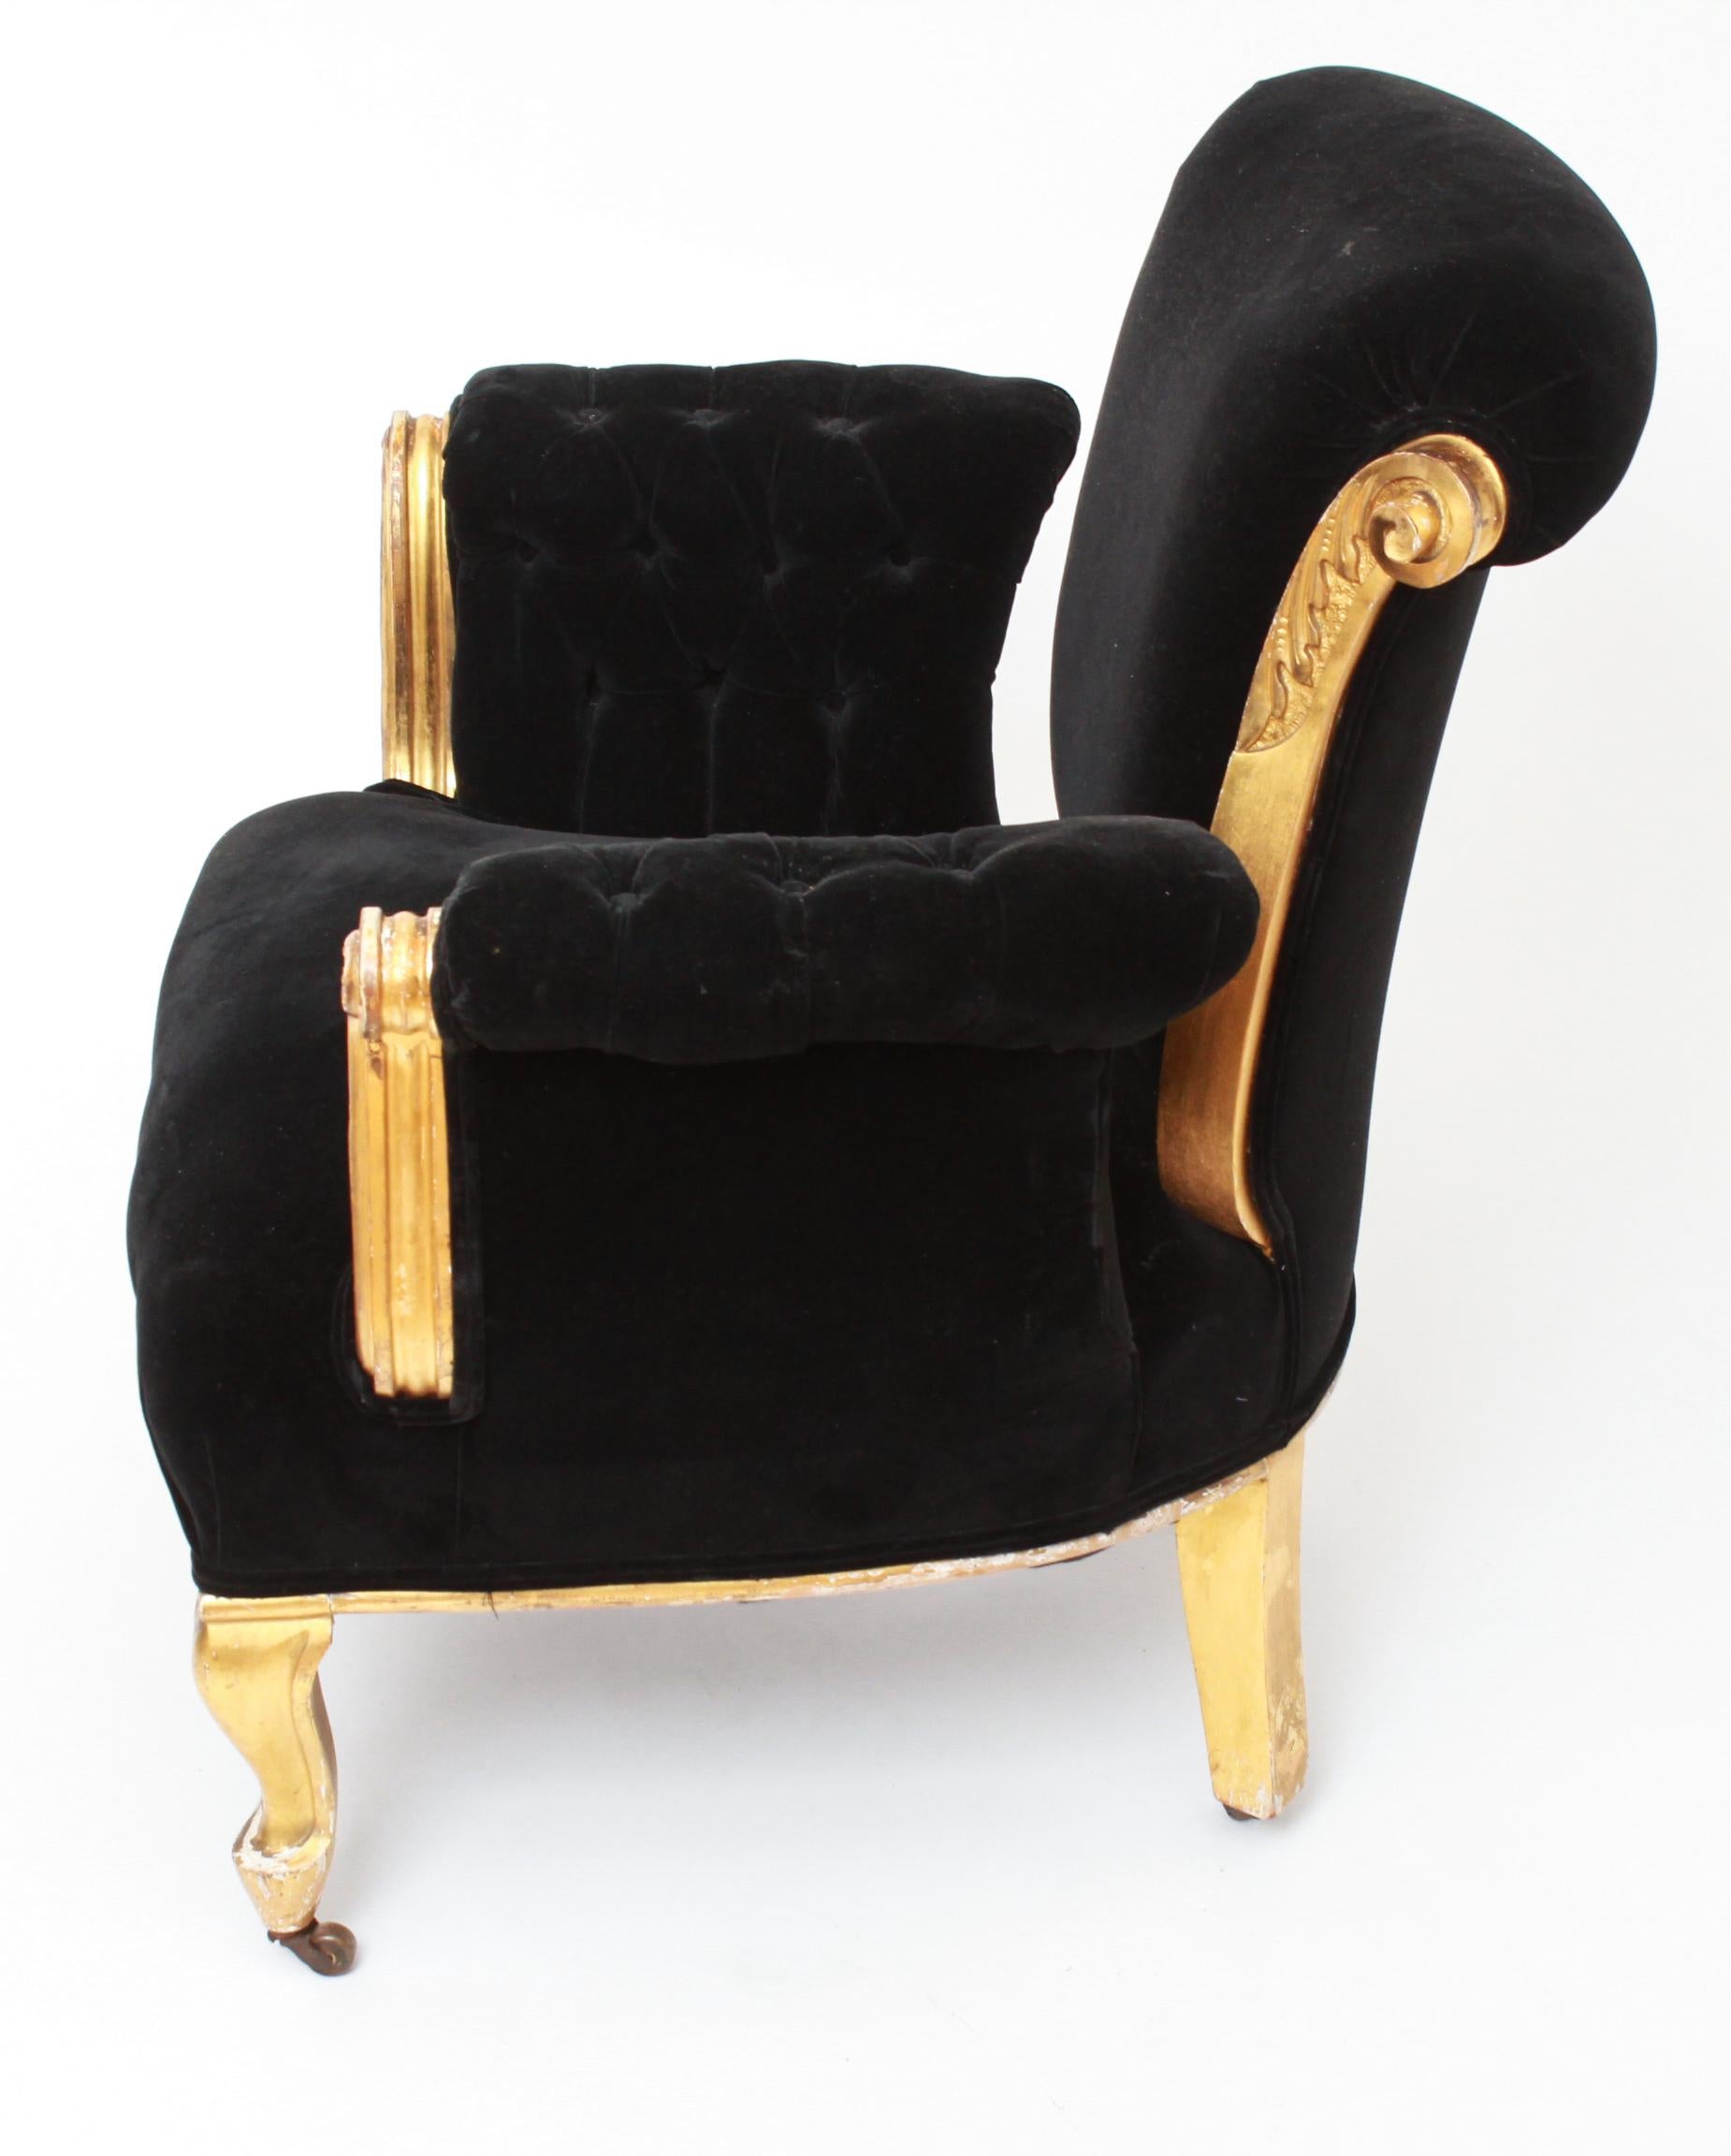 20th Century French Art Deco Style Giltwood Leaf and Scroll Armchair